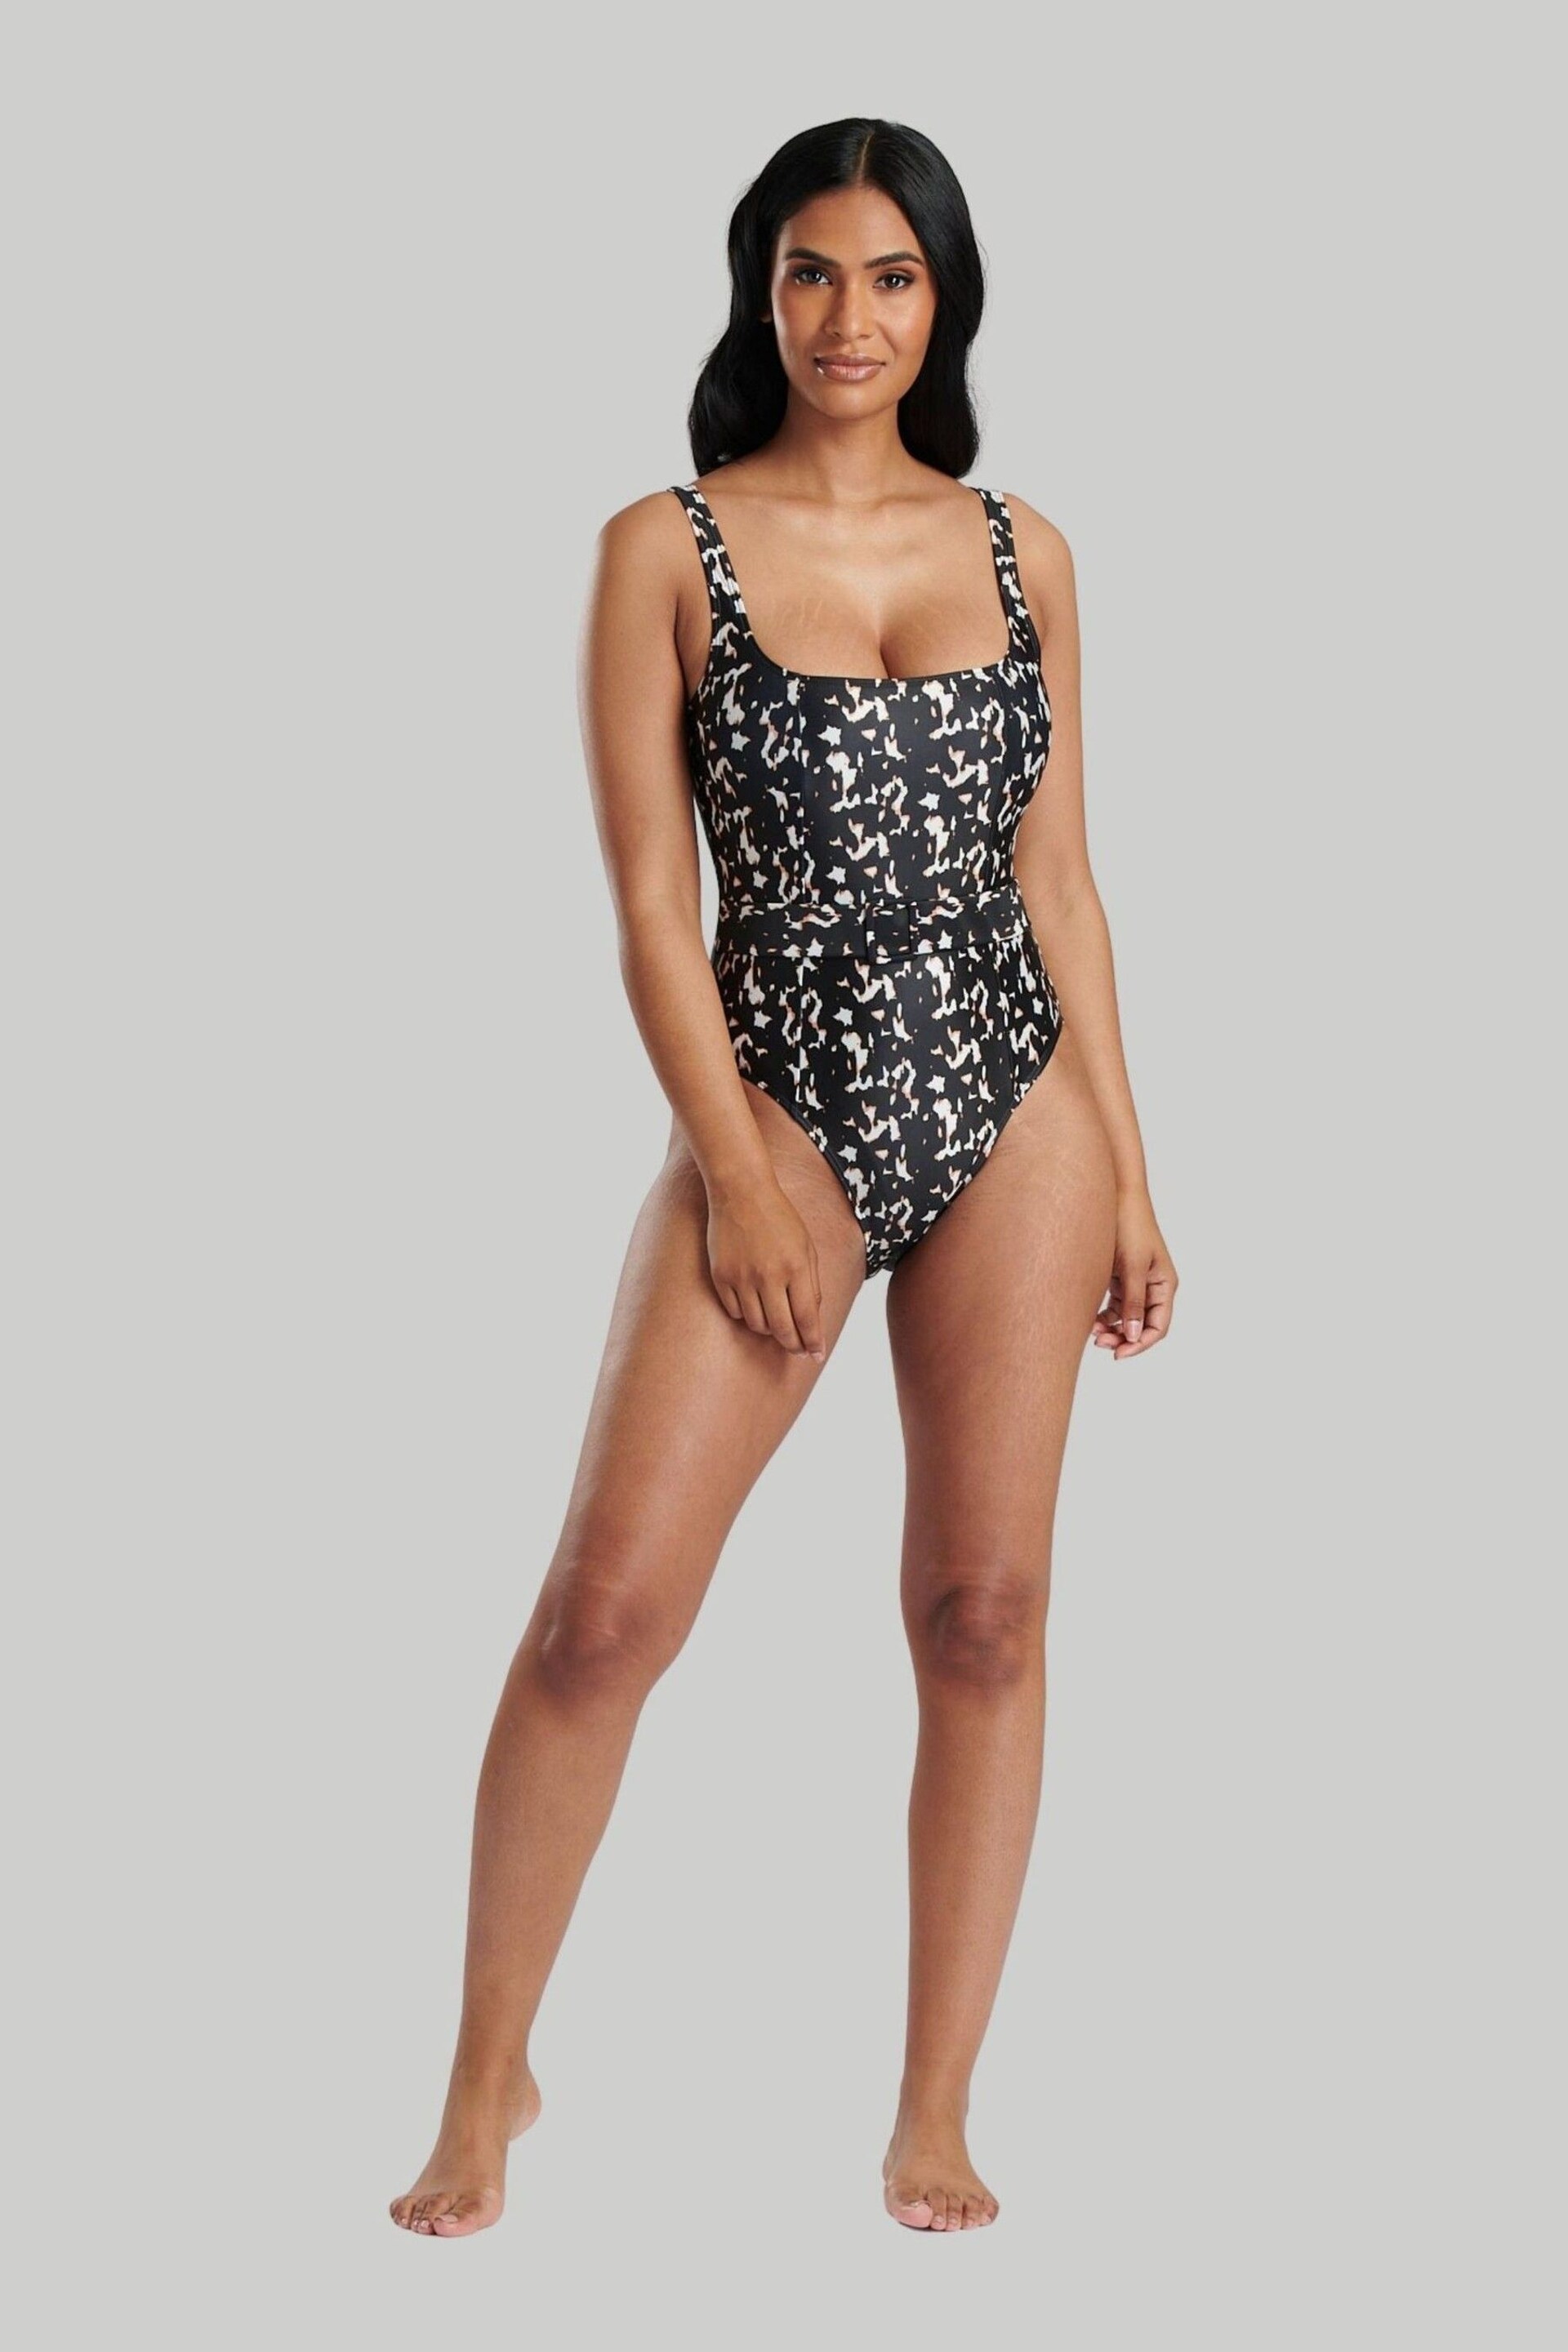 South Beach Black Animal Tummy Control  Swimsuit with Belt and Buckle - Image 4 of 6